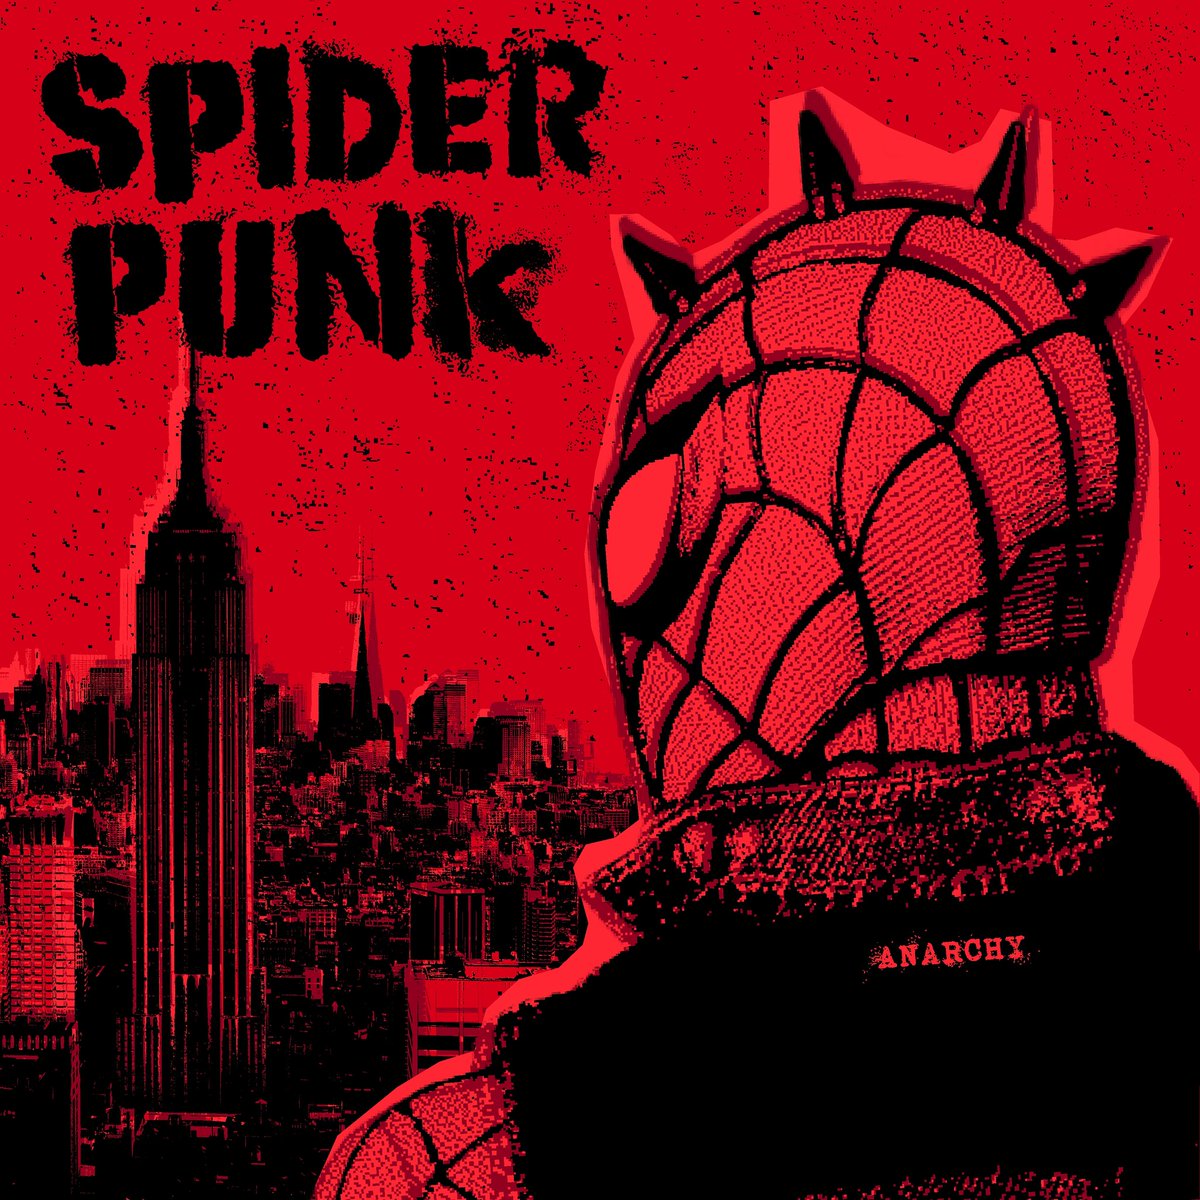 #AcrossTheSpiderVerse featuring #SpiderPunk was released in cinemas at the start of June on the same day that @Rancid released a new album, coincidence? 😄

#SpiderMan #Rancid #Indestructible #Punk #PunkRock #AlbumCoverParody #RecordCover #AlbumArt #AlbumCover #GraphicDesign